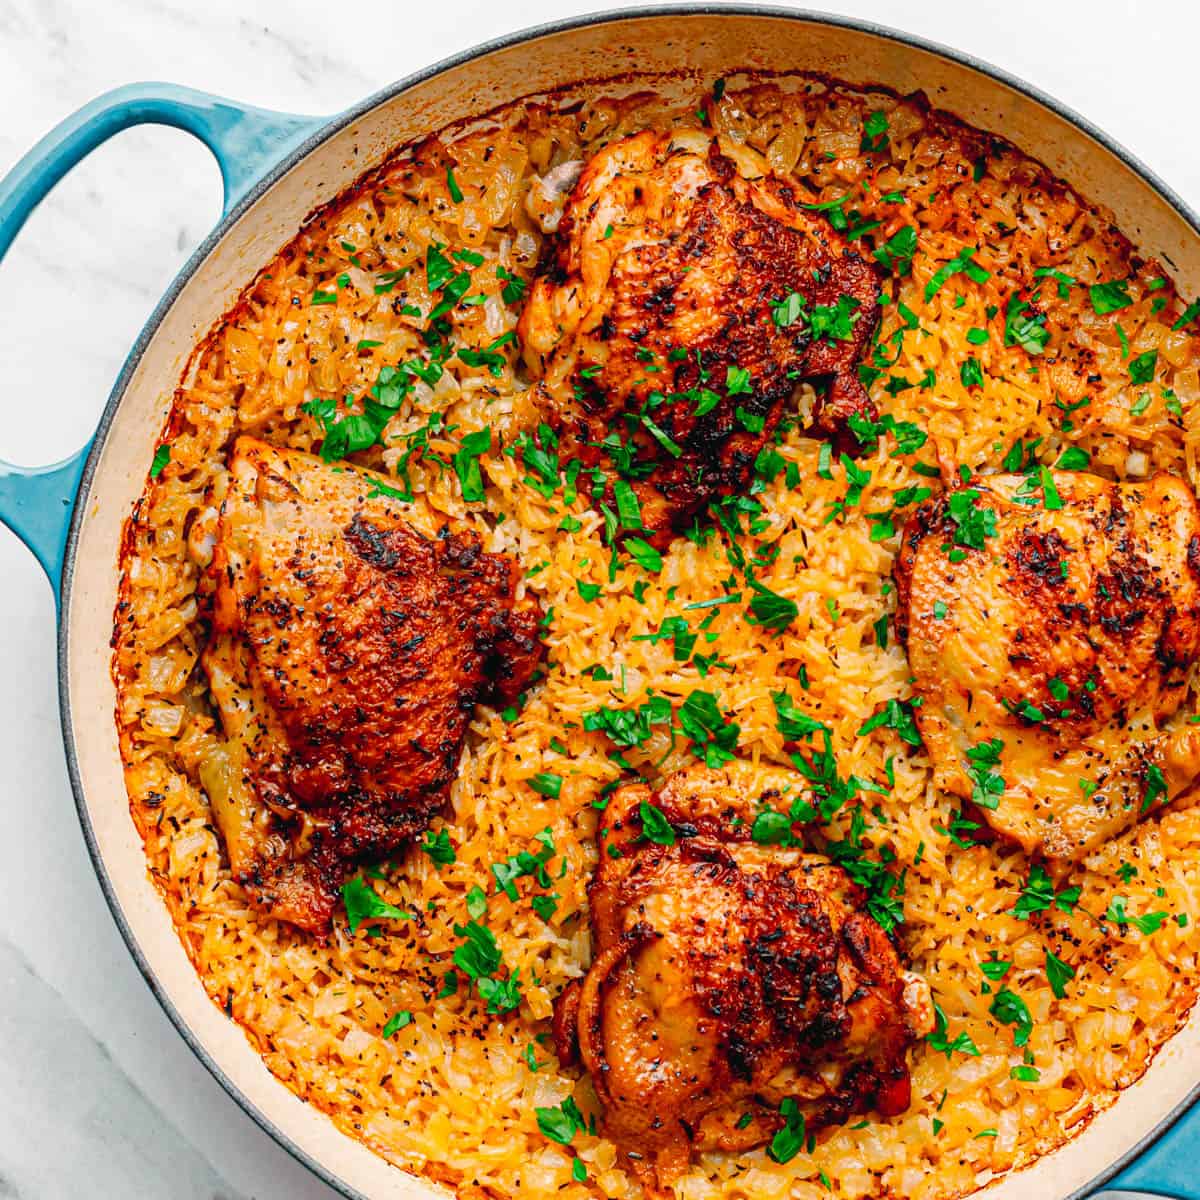 oven baked chicken and rice.